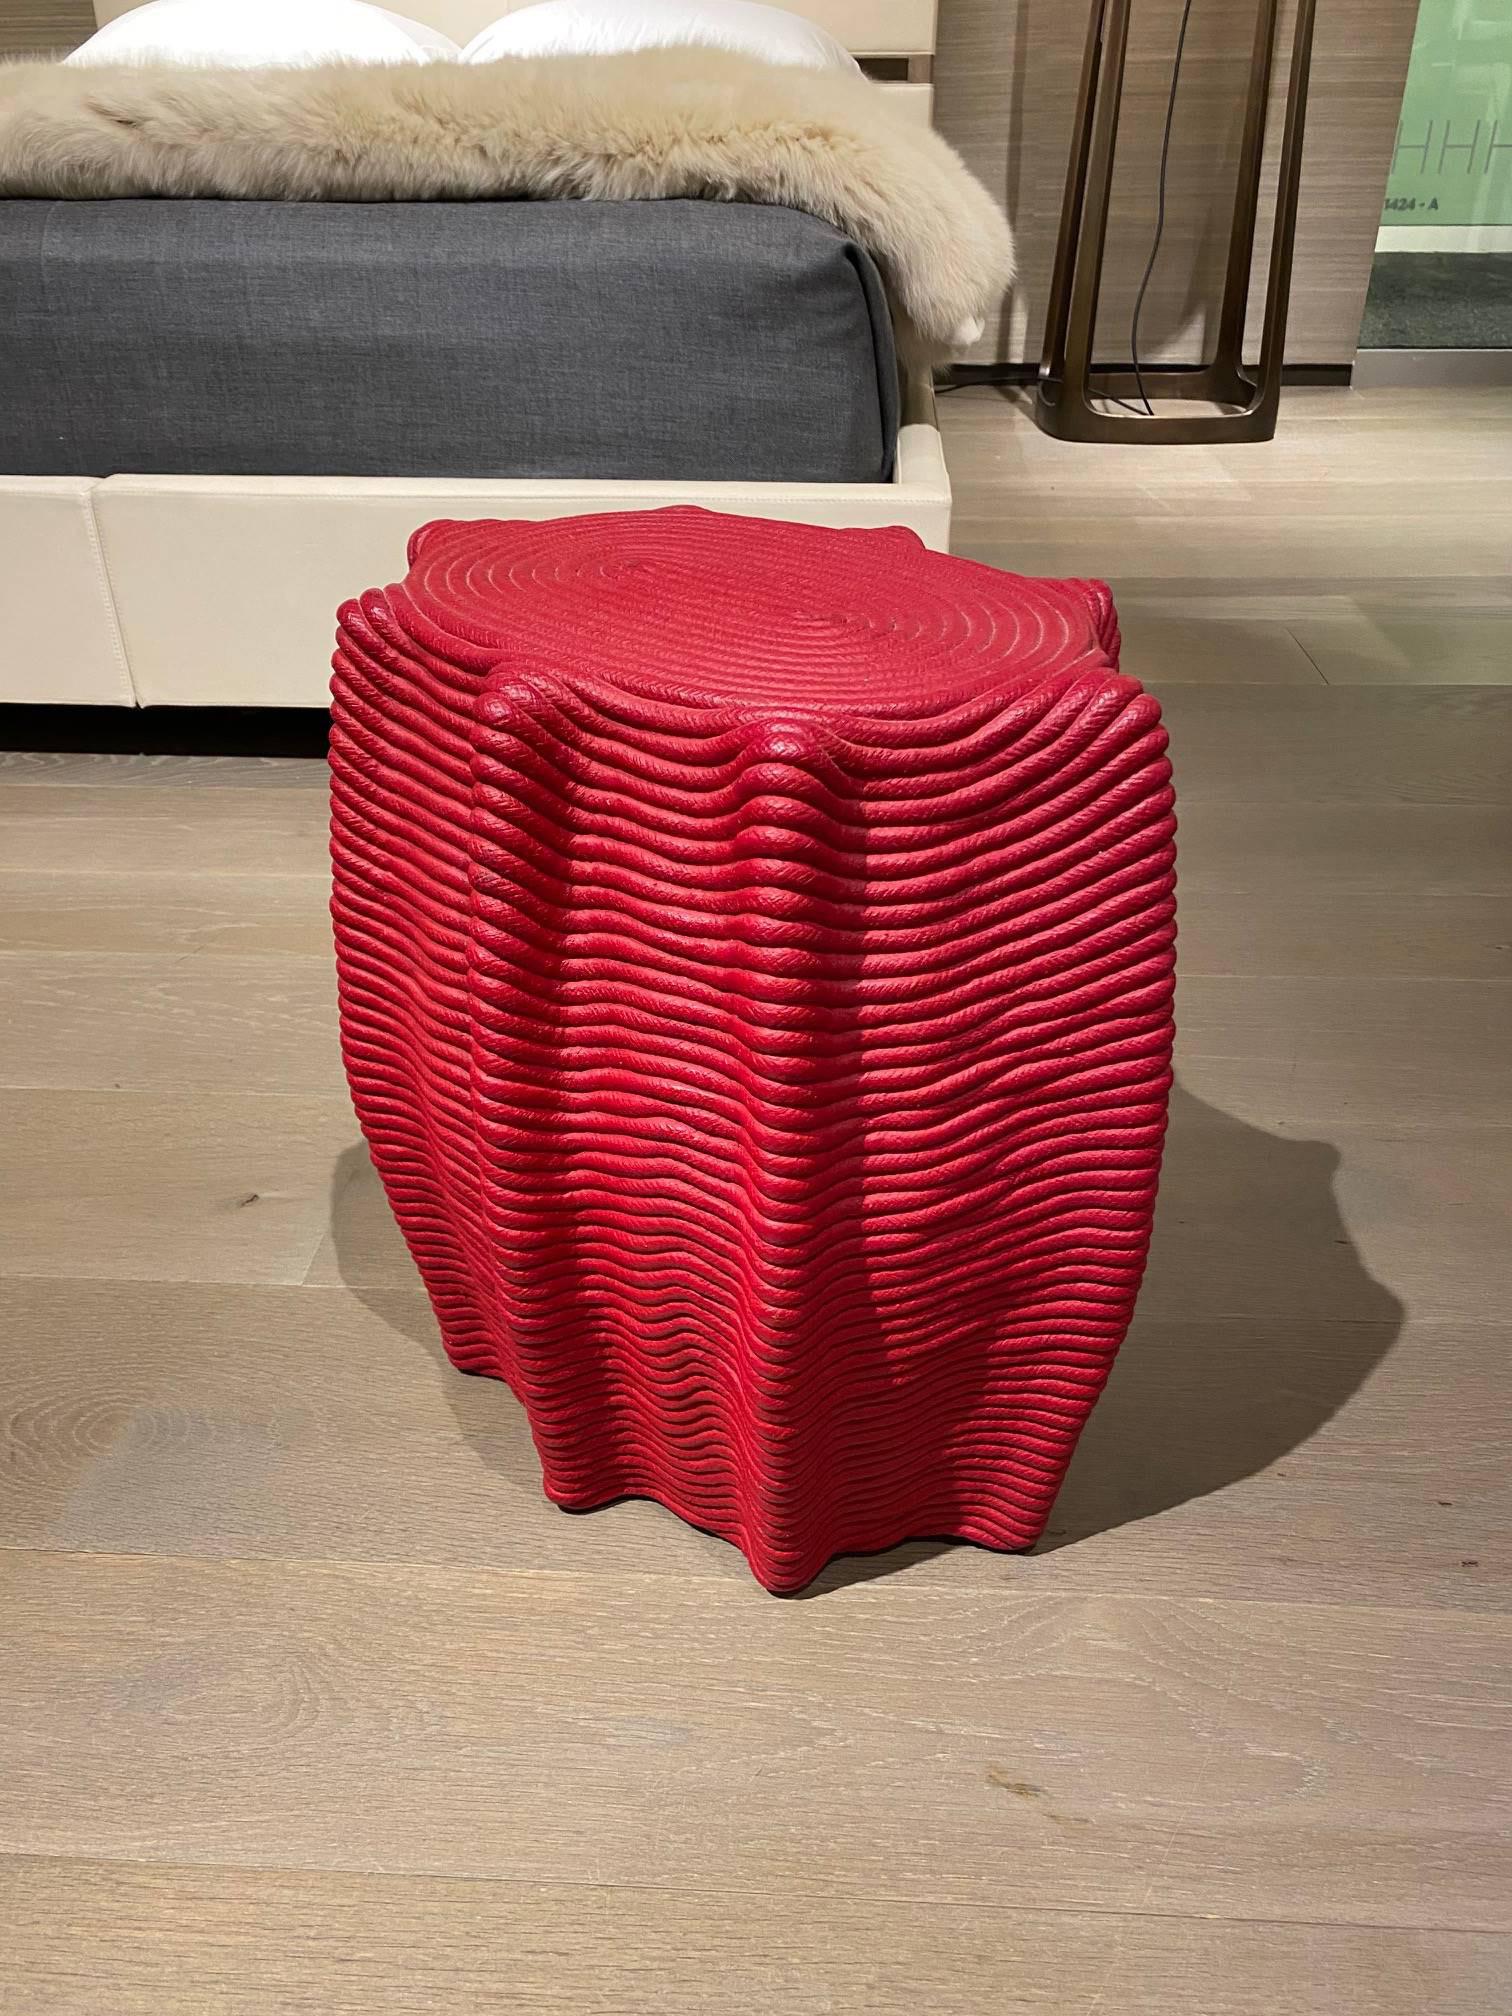 Painted HOLLY HUNT Mivalo Stool in Carmin Red Cotton Cord by Christian Astuguevieille